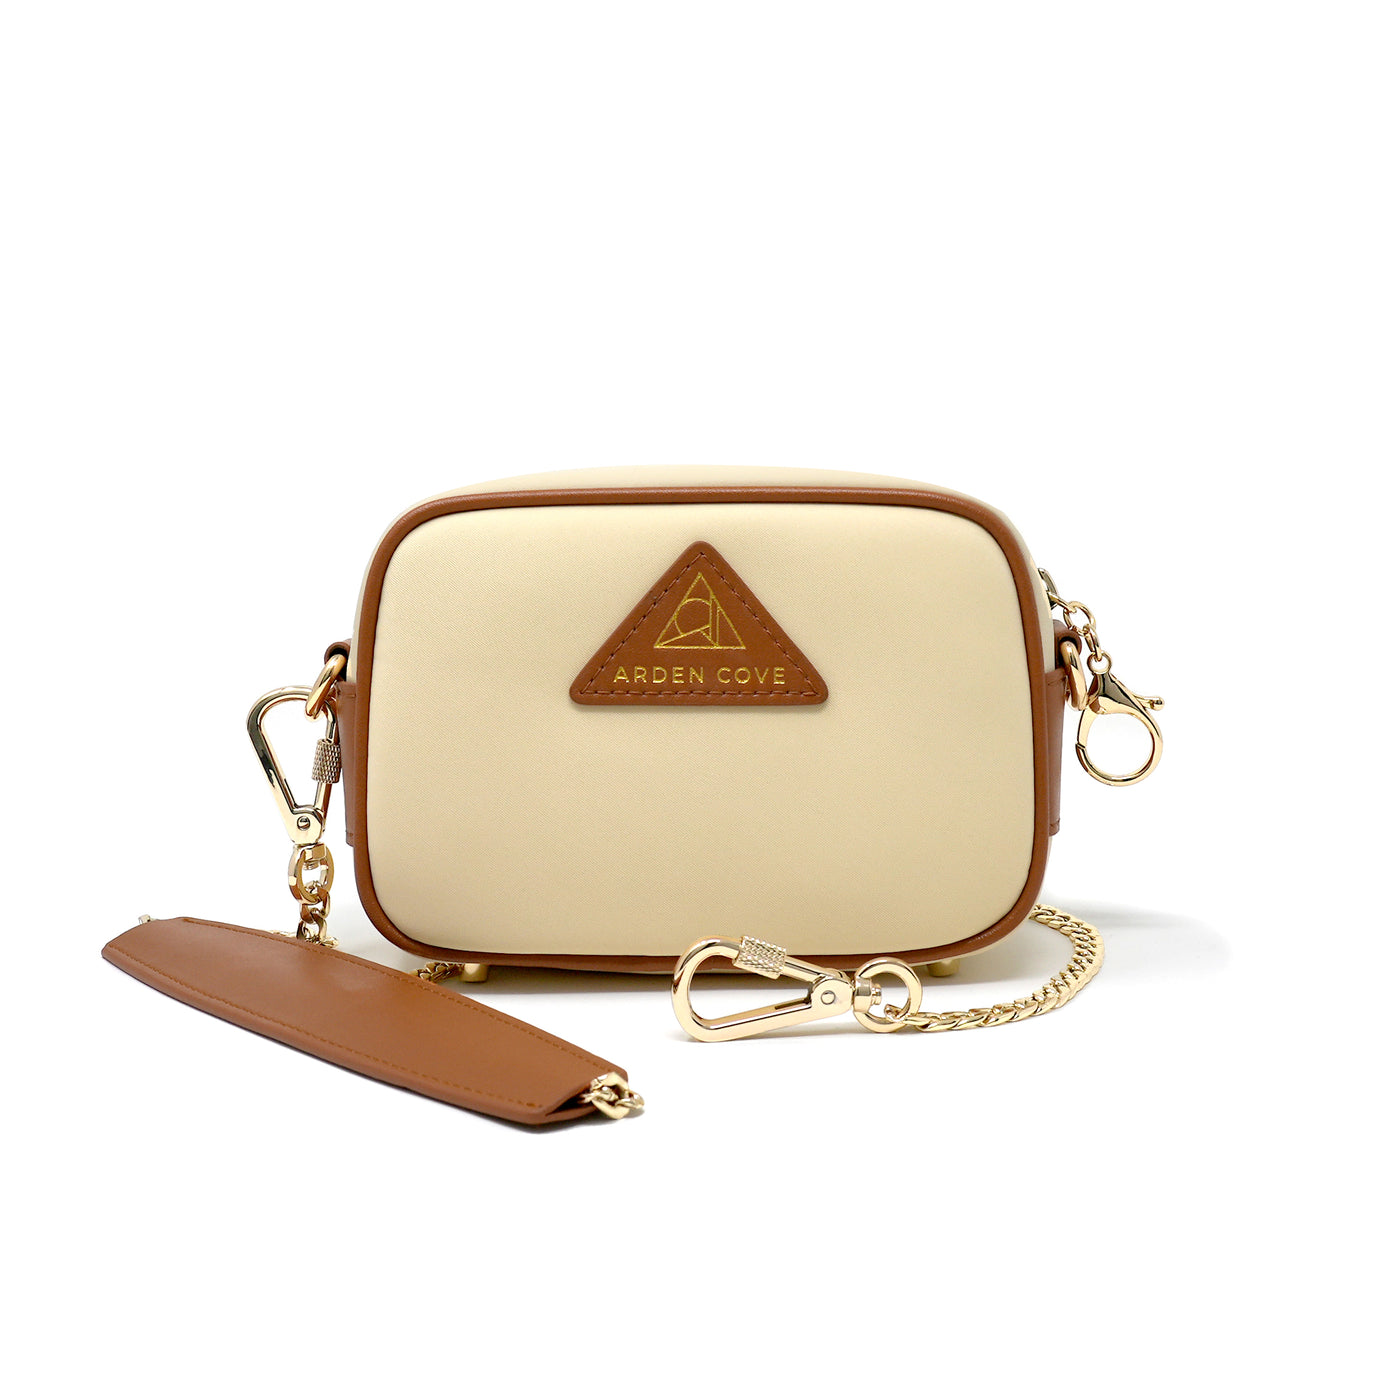 Anti-theft Water-resistant Travel Crossbody - Crissy Mini Crossbody in Cream Gold with slash-resistant chain & locking clasps straps - front view - Arden Cove